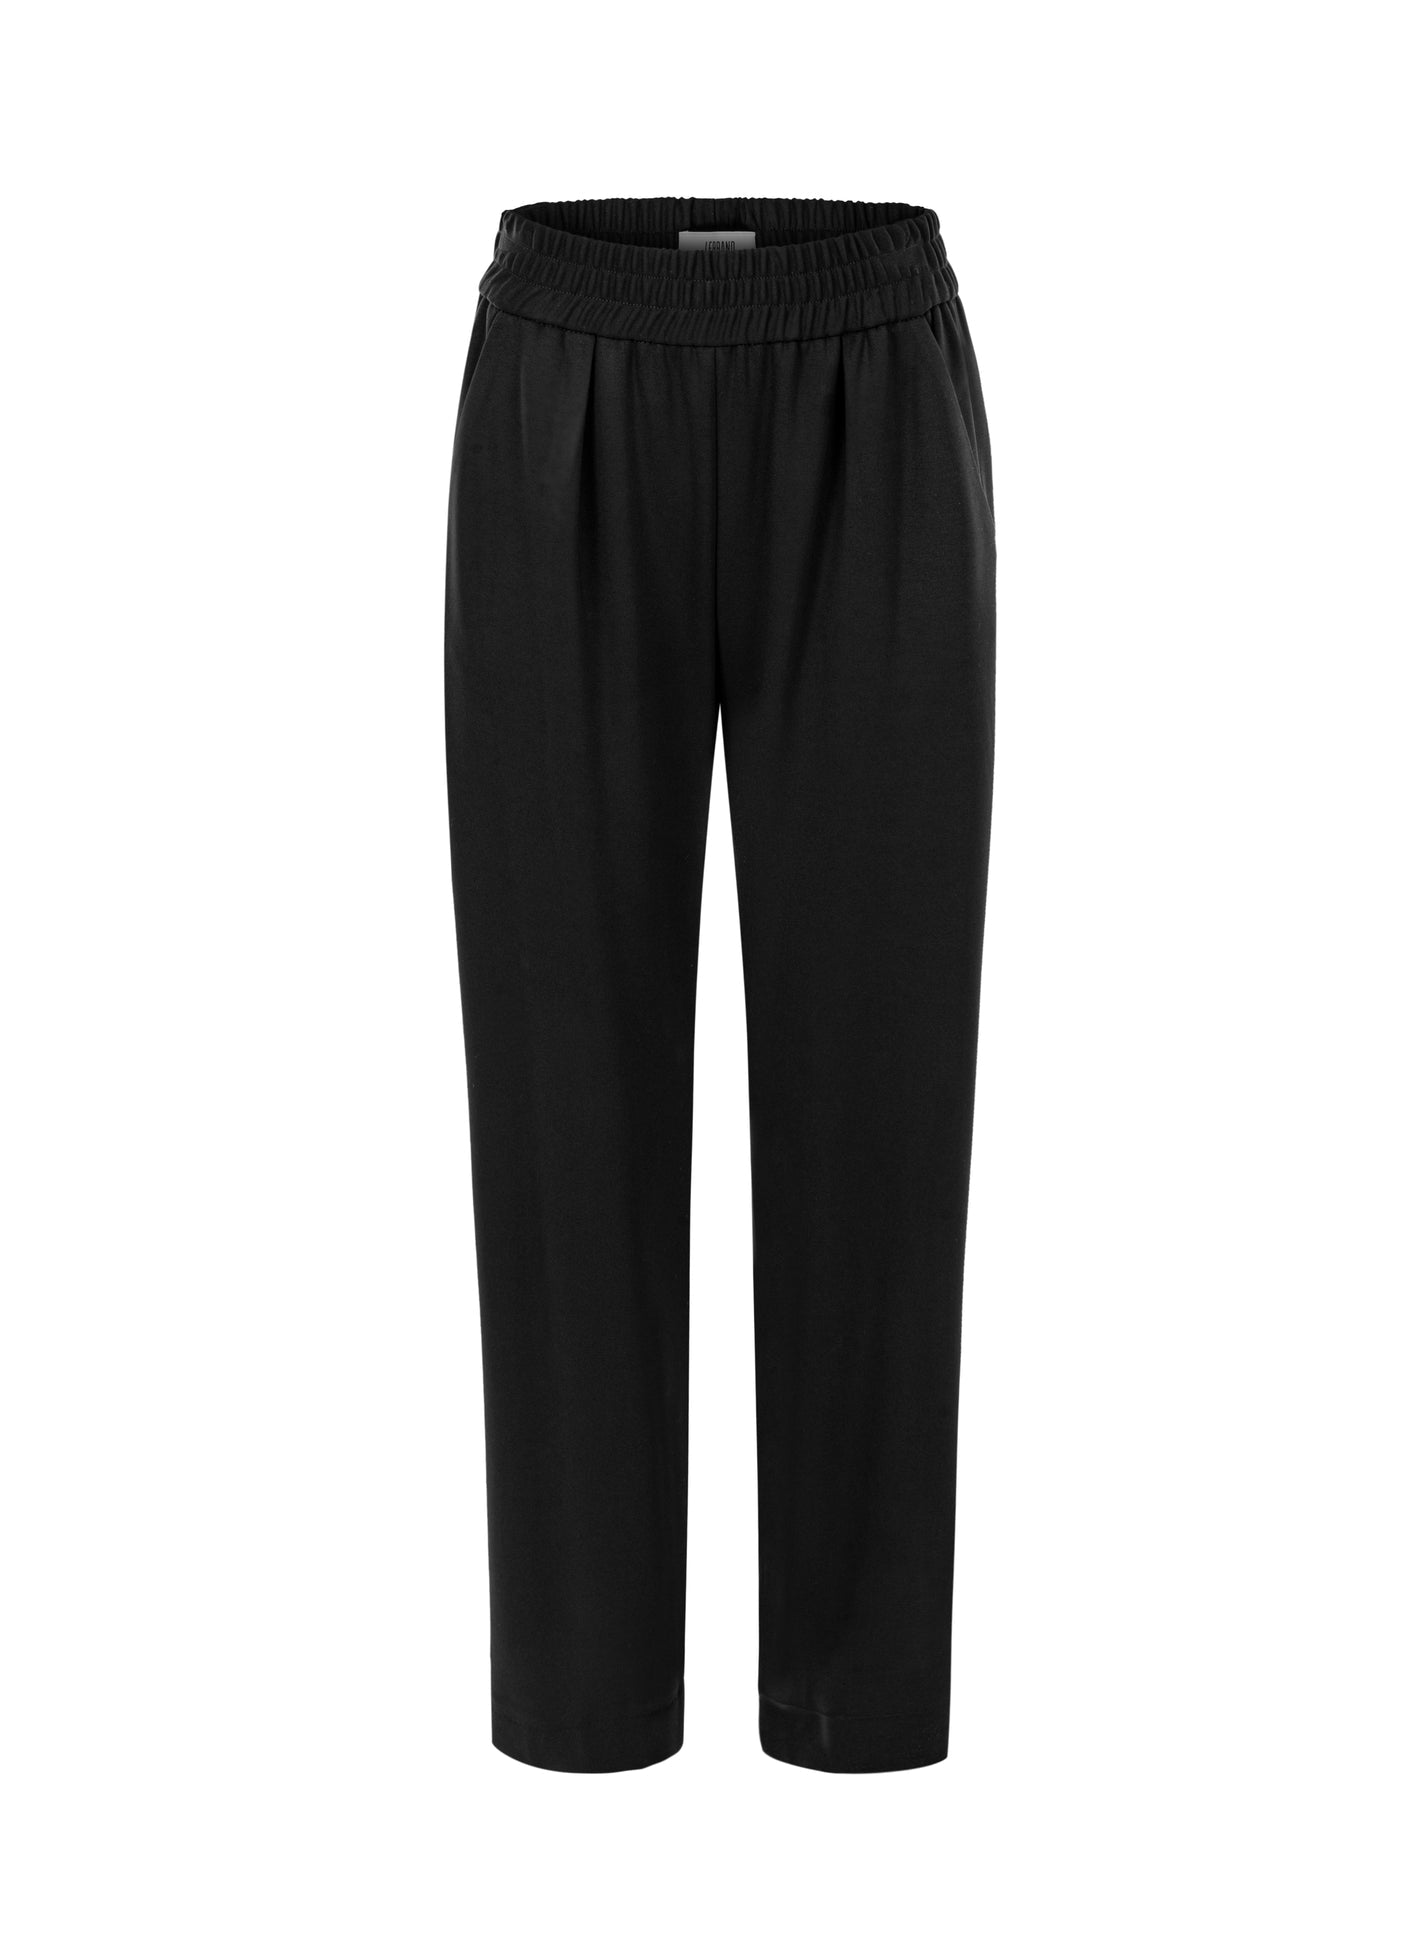 Ome, Black, Jersey Pants